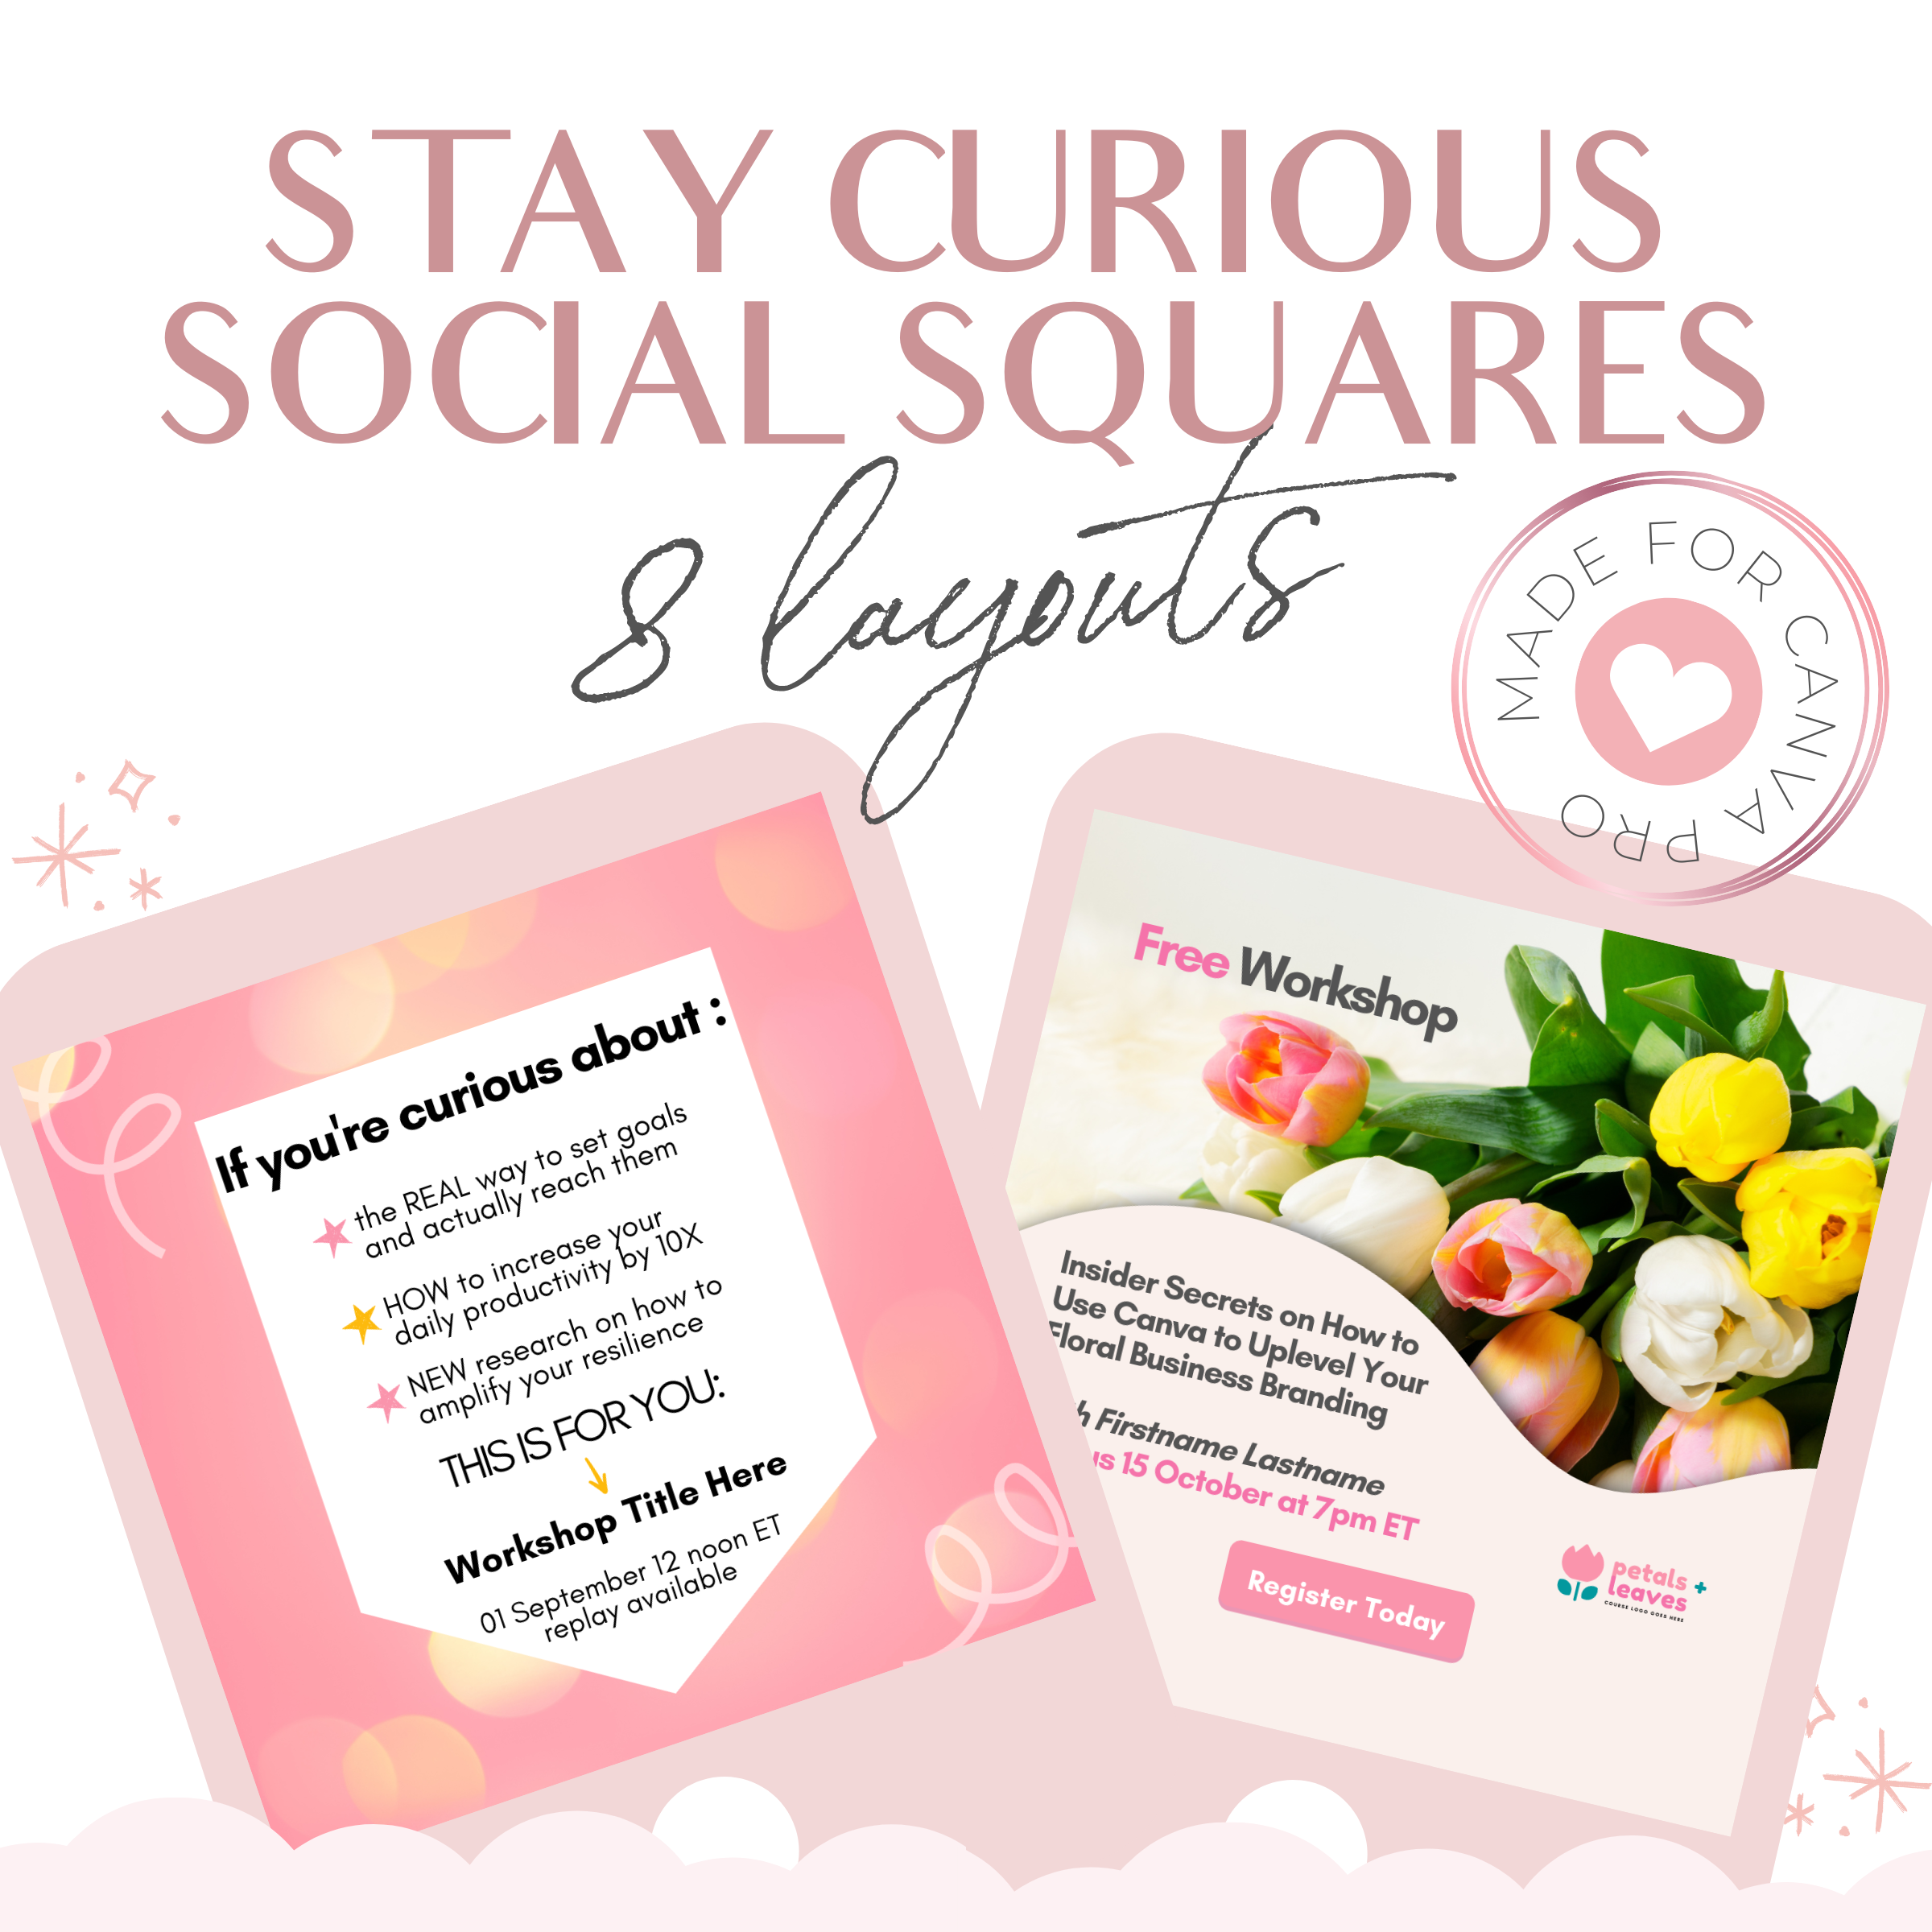 Stay Curious Social Squares